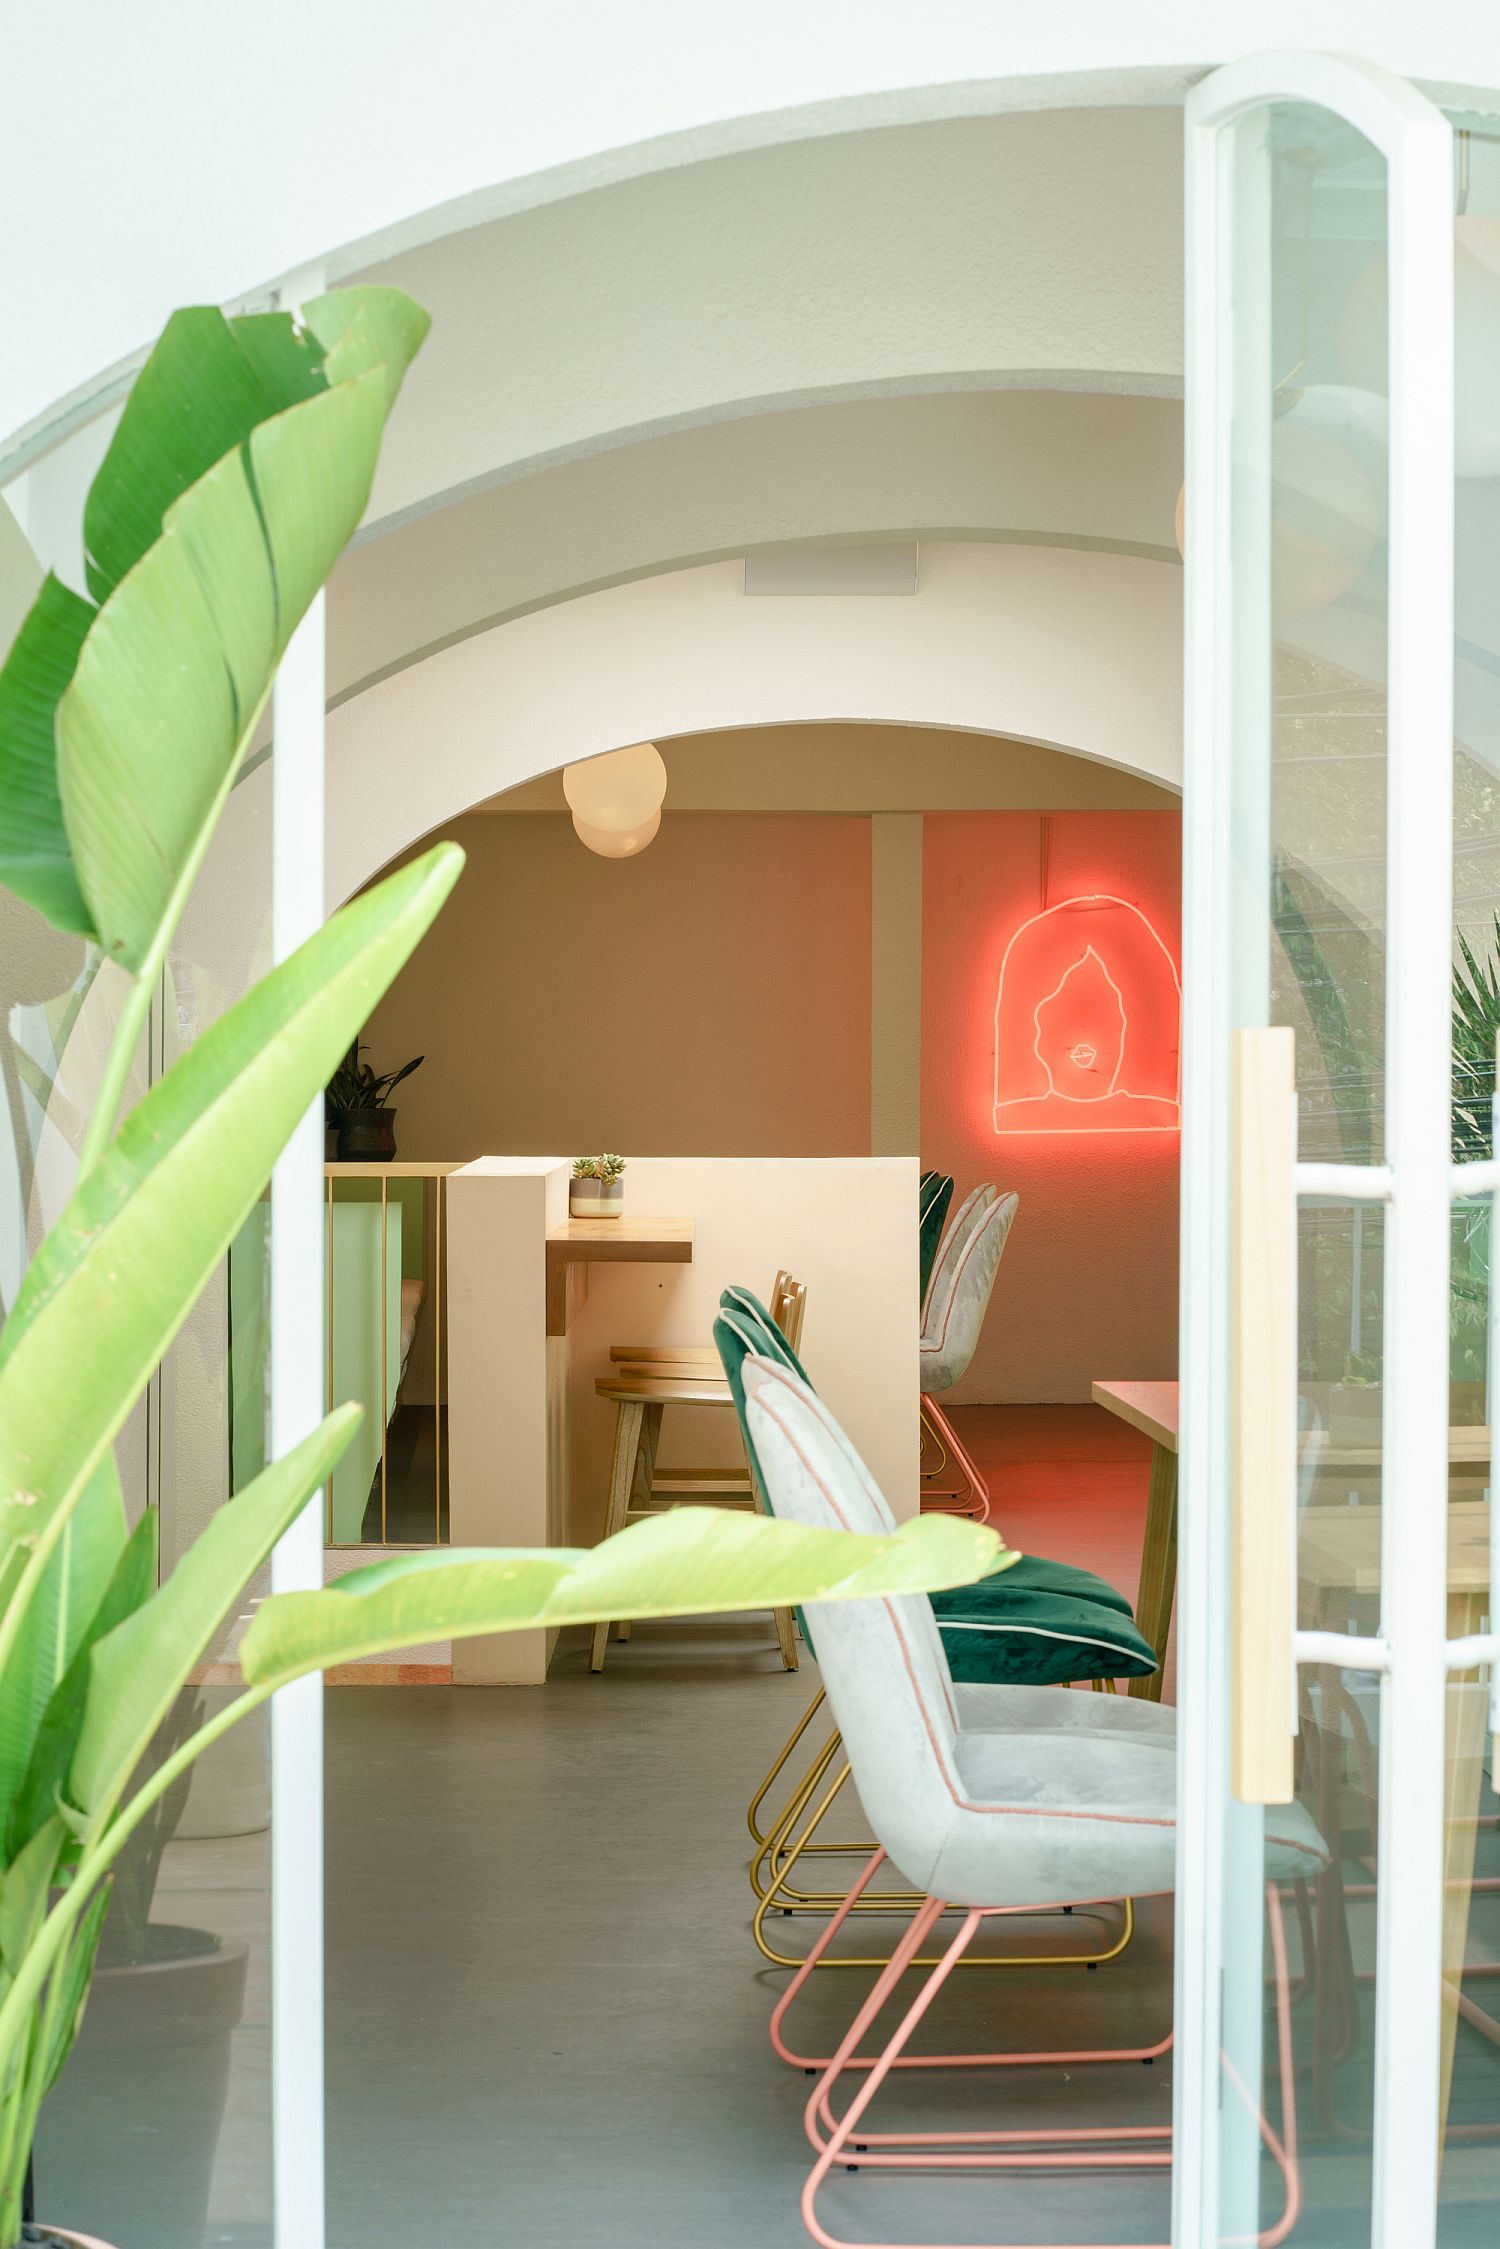 Neon-lighting-and-greenery-bring-even-more-color-to-the-cafe